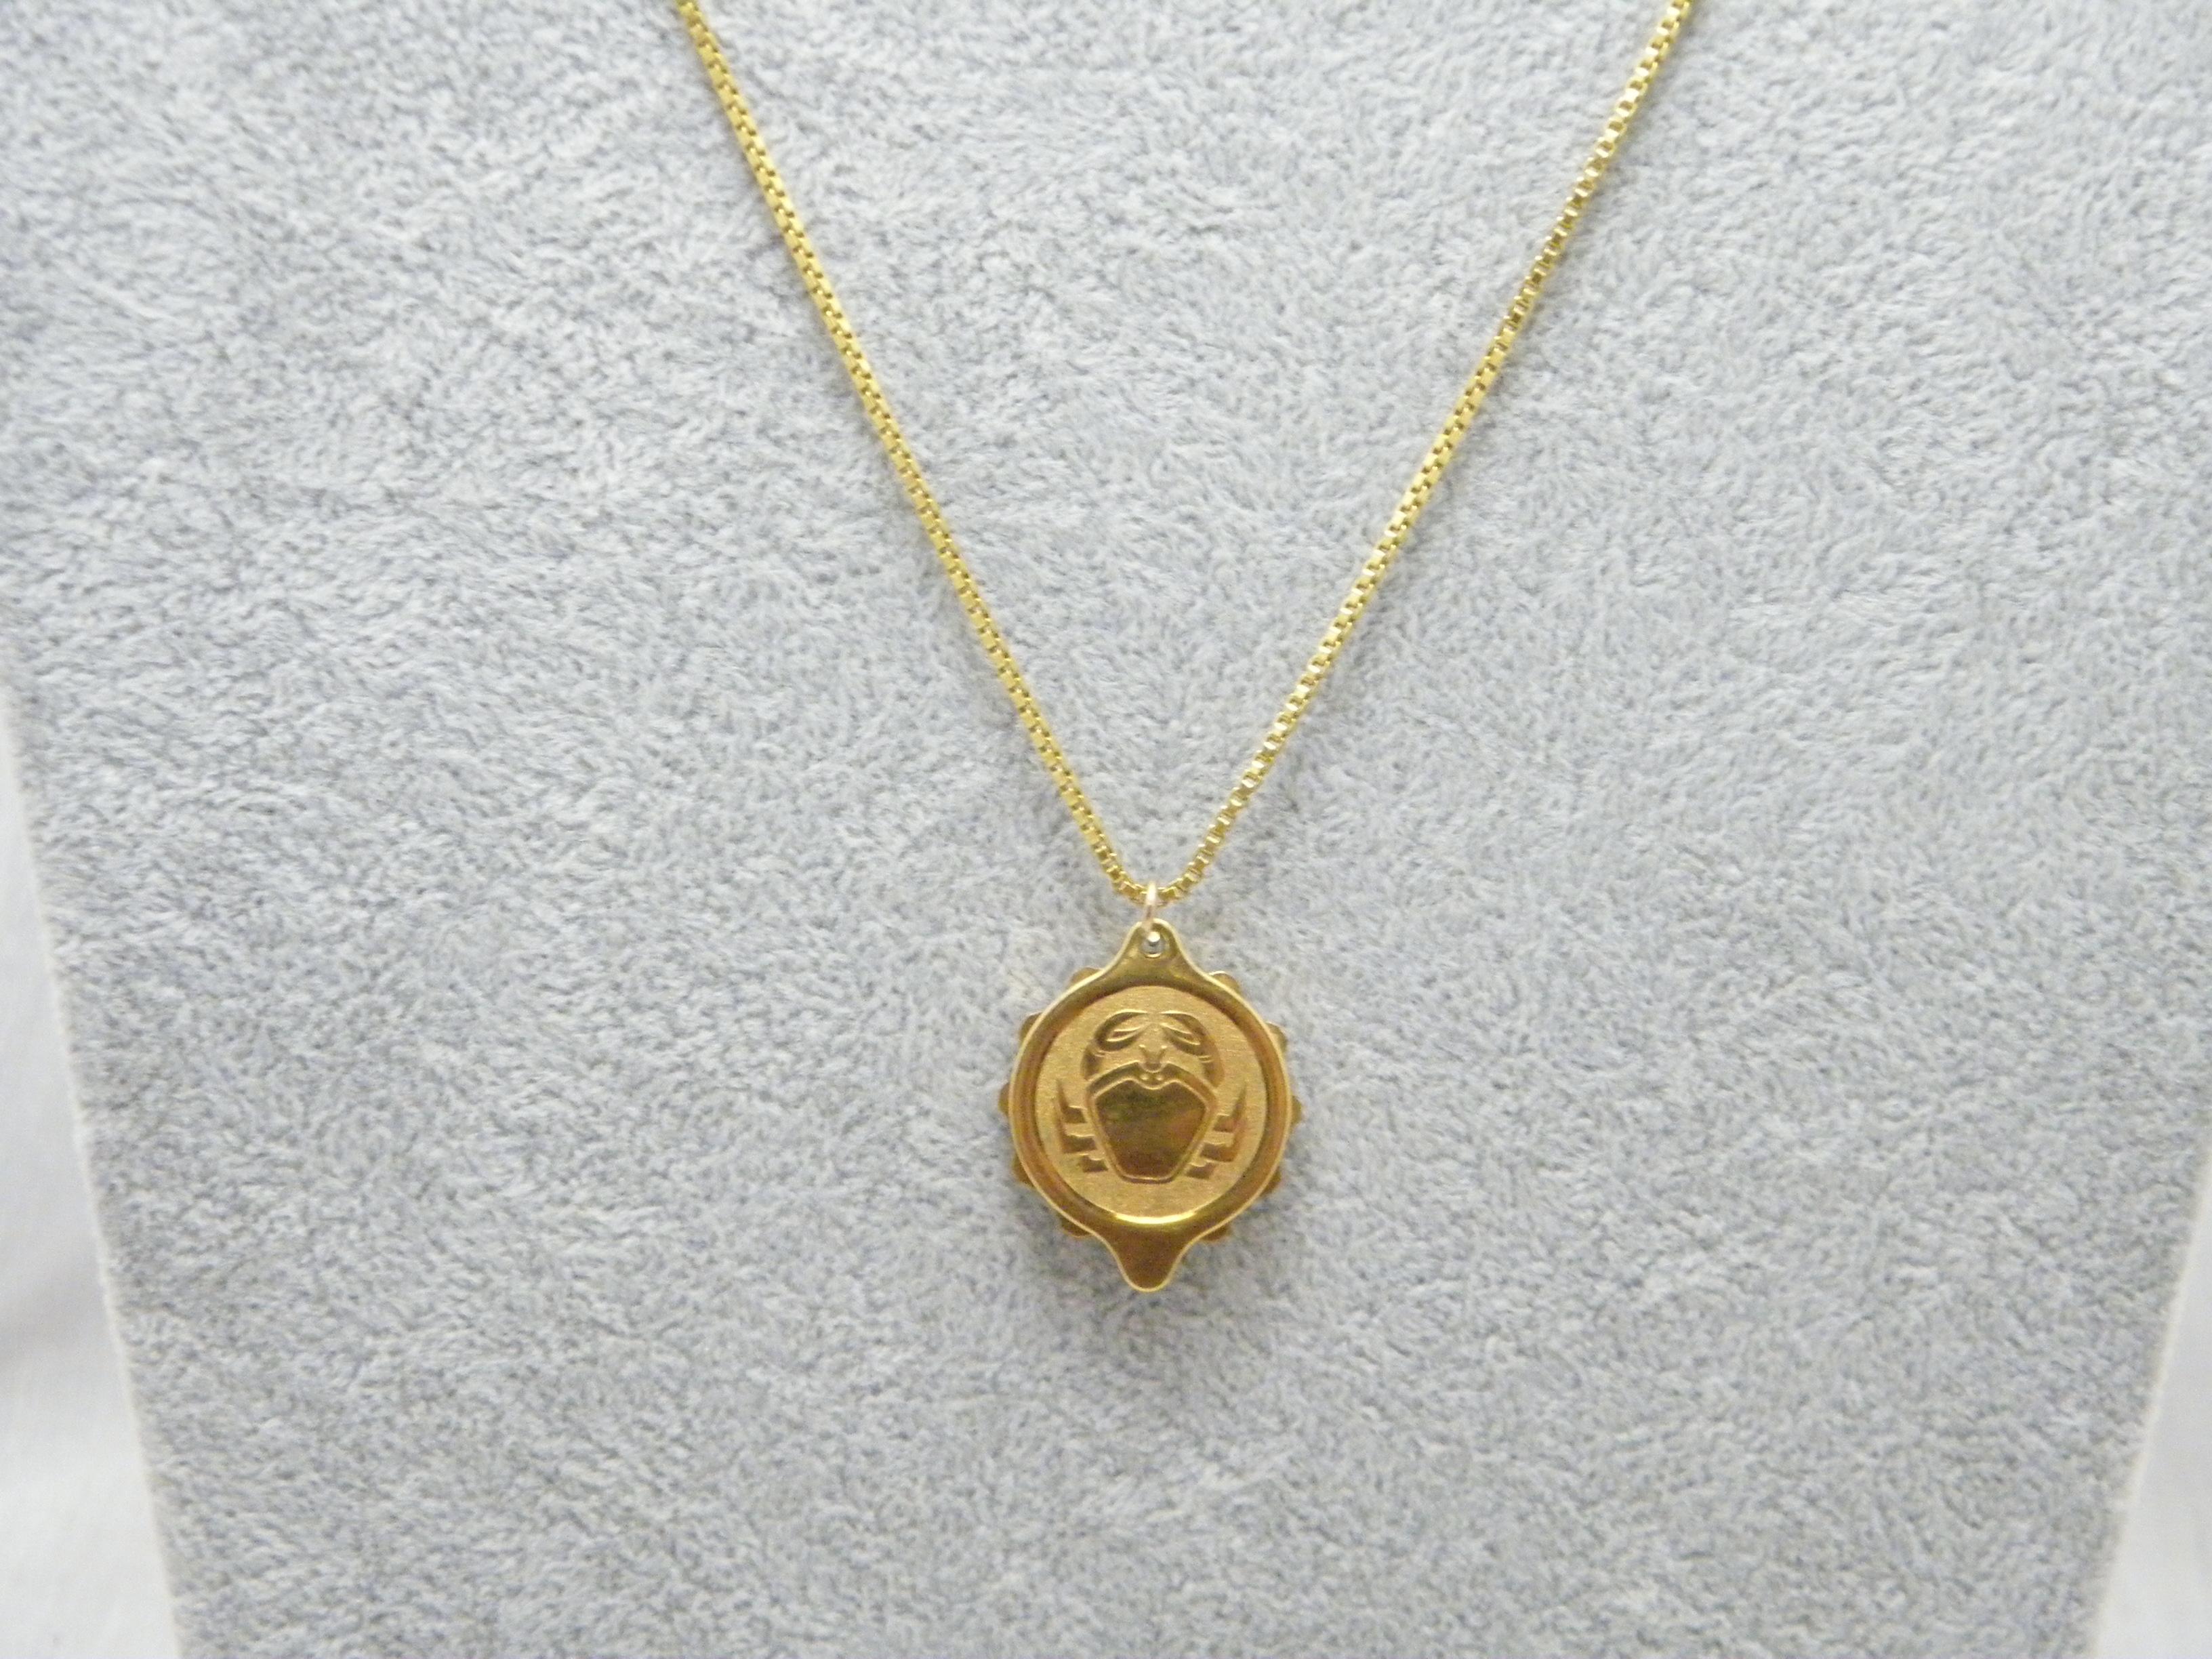 If you have landed on this page then you have an eye for beauty.

On offer is this gorgeous

9CT GOLD HEAVY CANCER THE CRAB SOS MEDICAL PENDANT NECKLACE

PENDANT DESCRIPTION
DETAILS
Material: Solid 9ct (375/000) yellow gold
Style: Round frame with